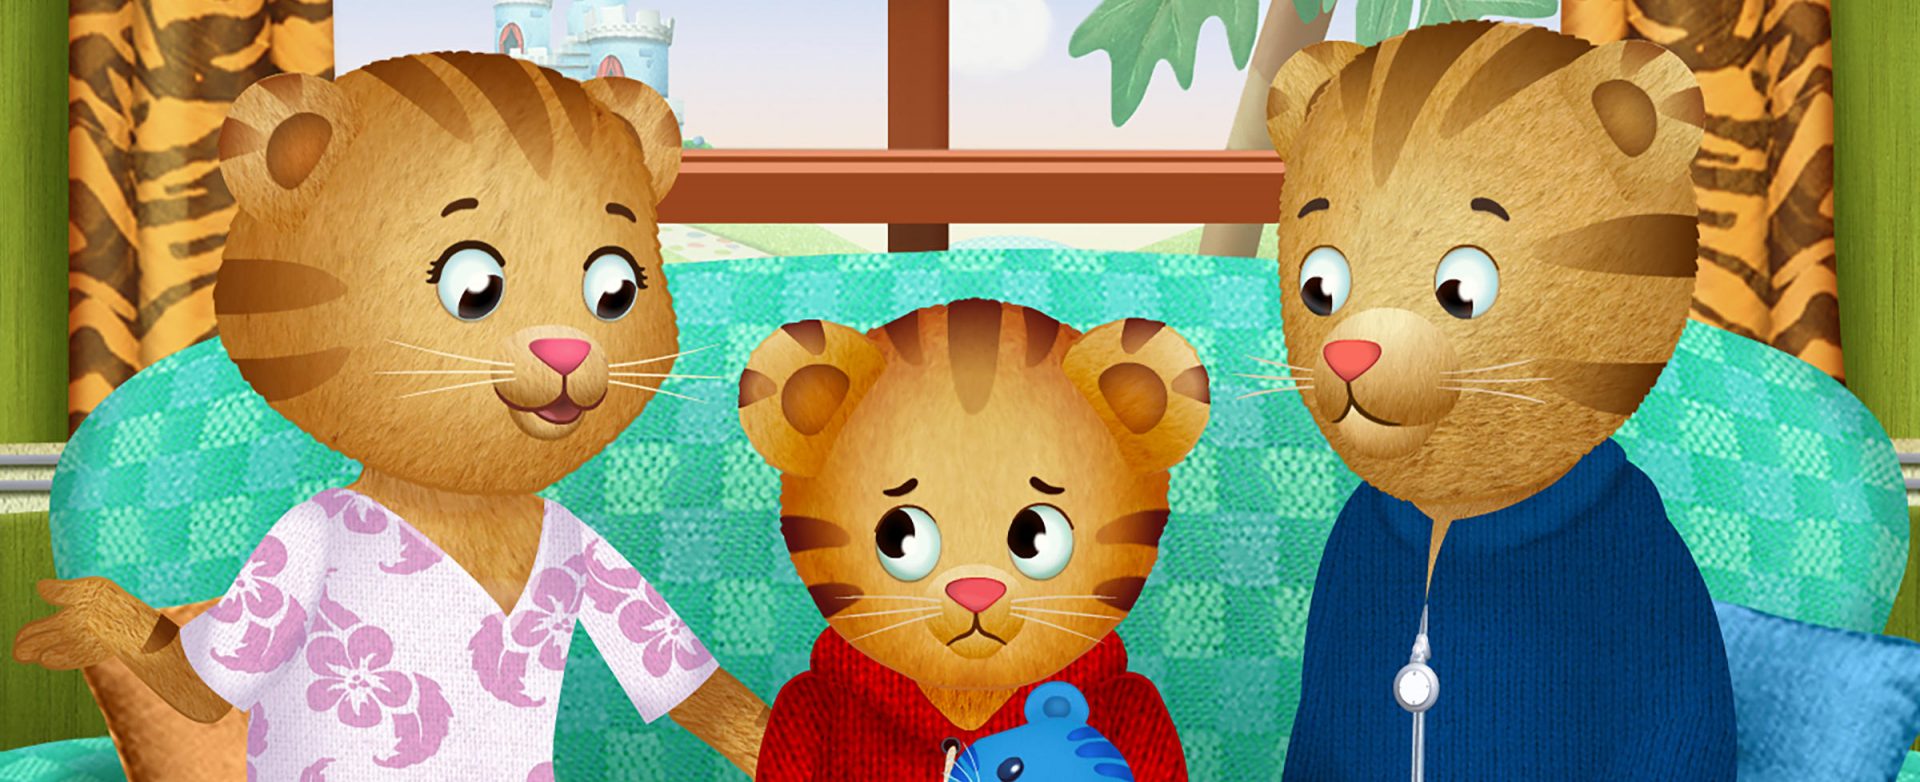 Daniel Tiger learns to cope when the pandemic reaches the World of Make